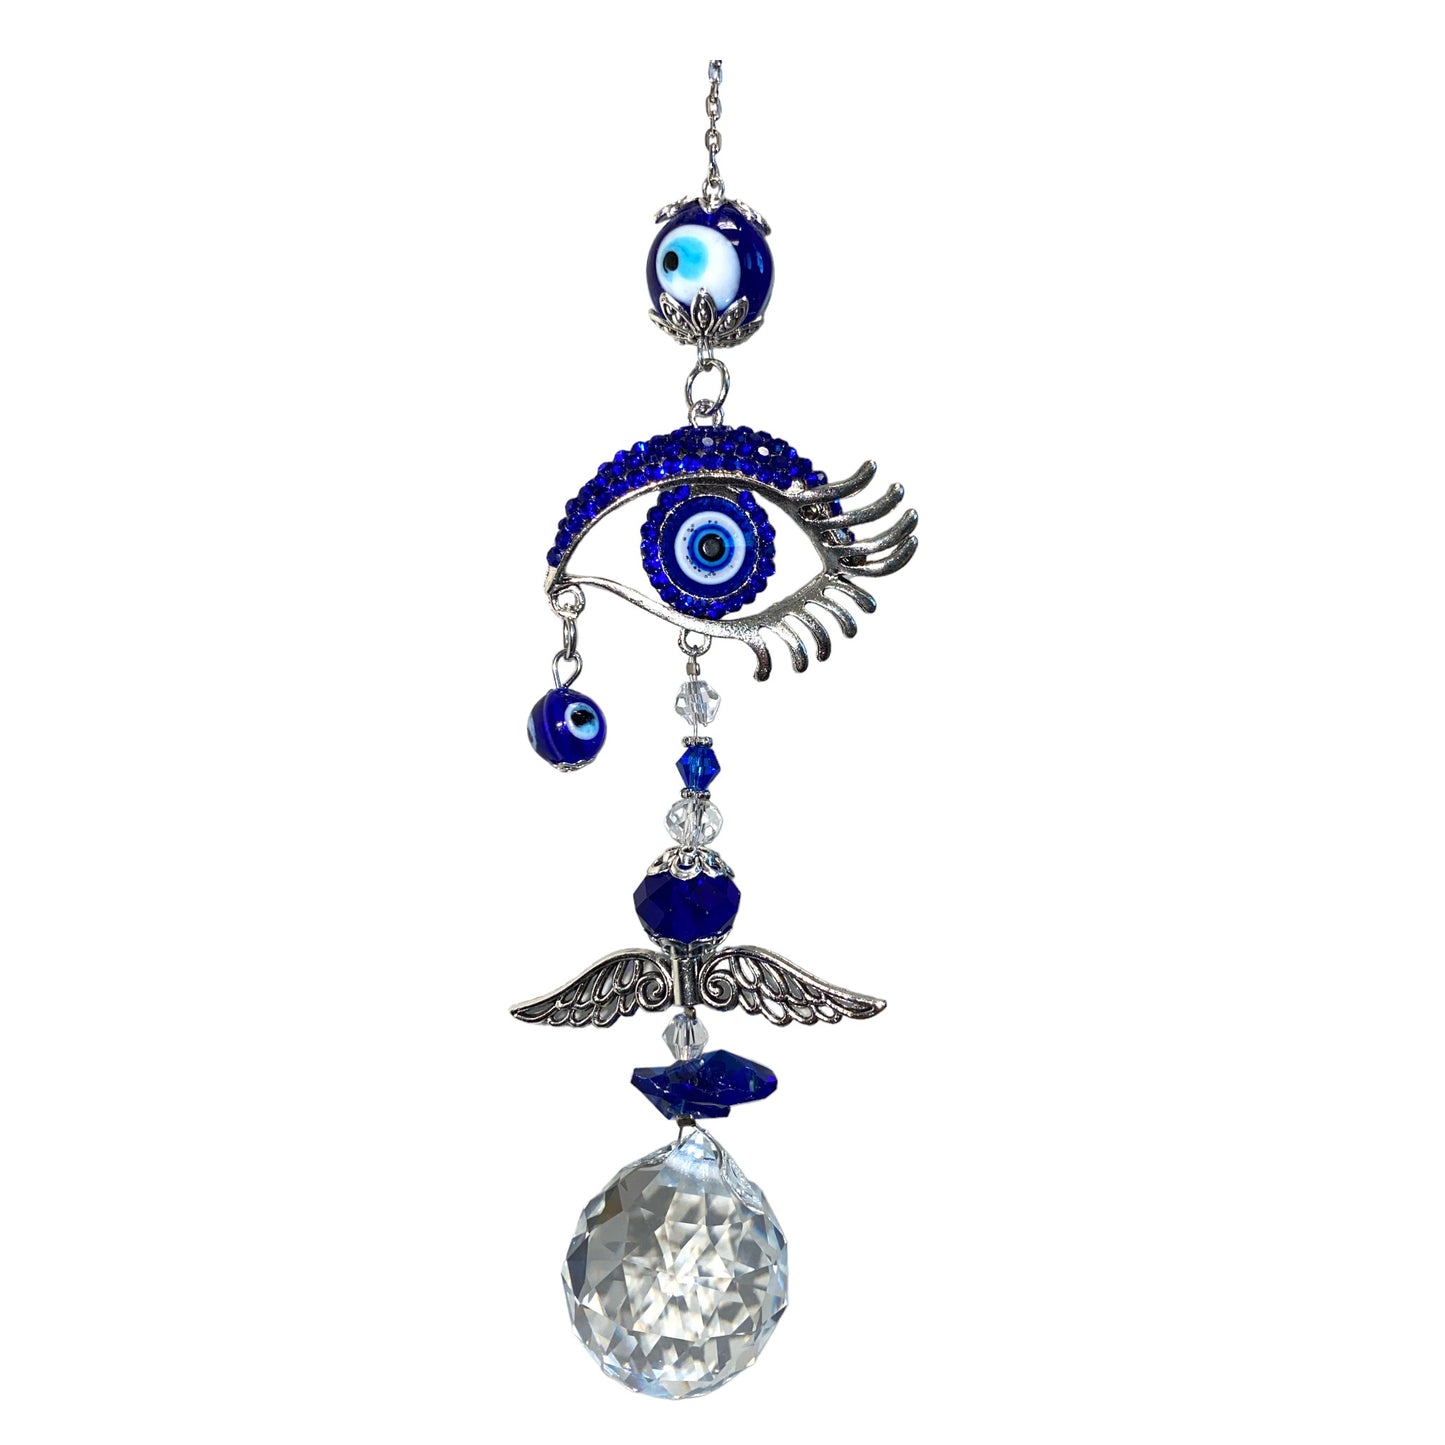 Evil Eye Hanger with K9 Crystal Ball and Blown Glass Eyes - Long - 13 inch  - China - NEW123